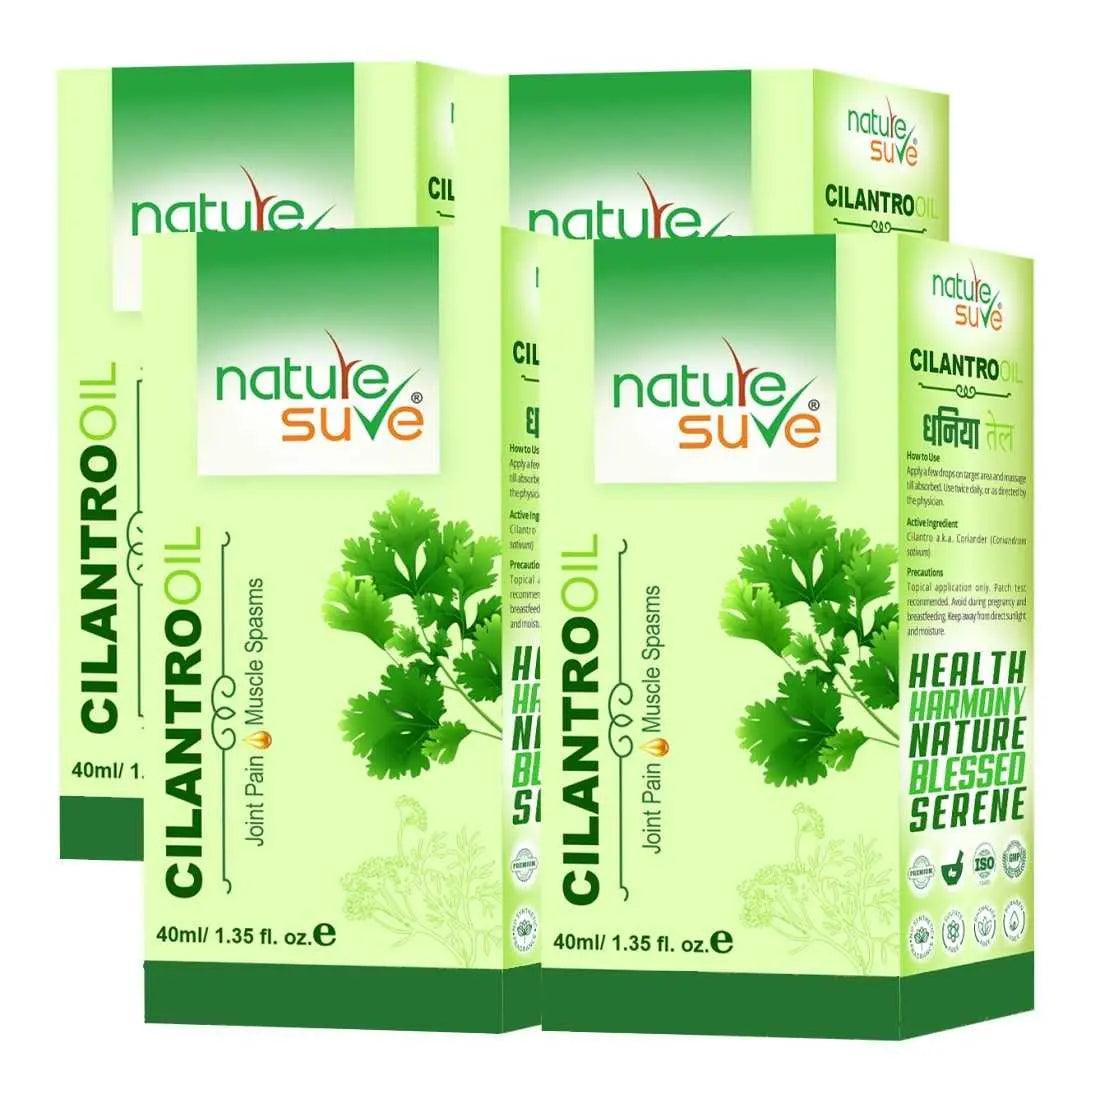 Nature Sure Cilantro Dhania Oil for Joint Pain and Muscle Spasms in Men & Women - 40ml 7419870522865